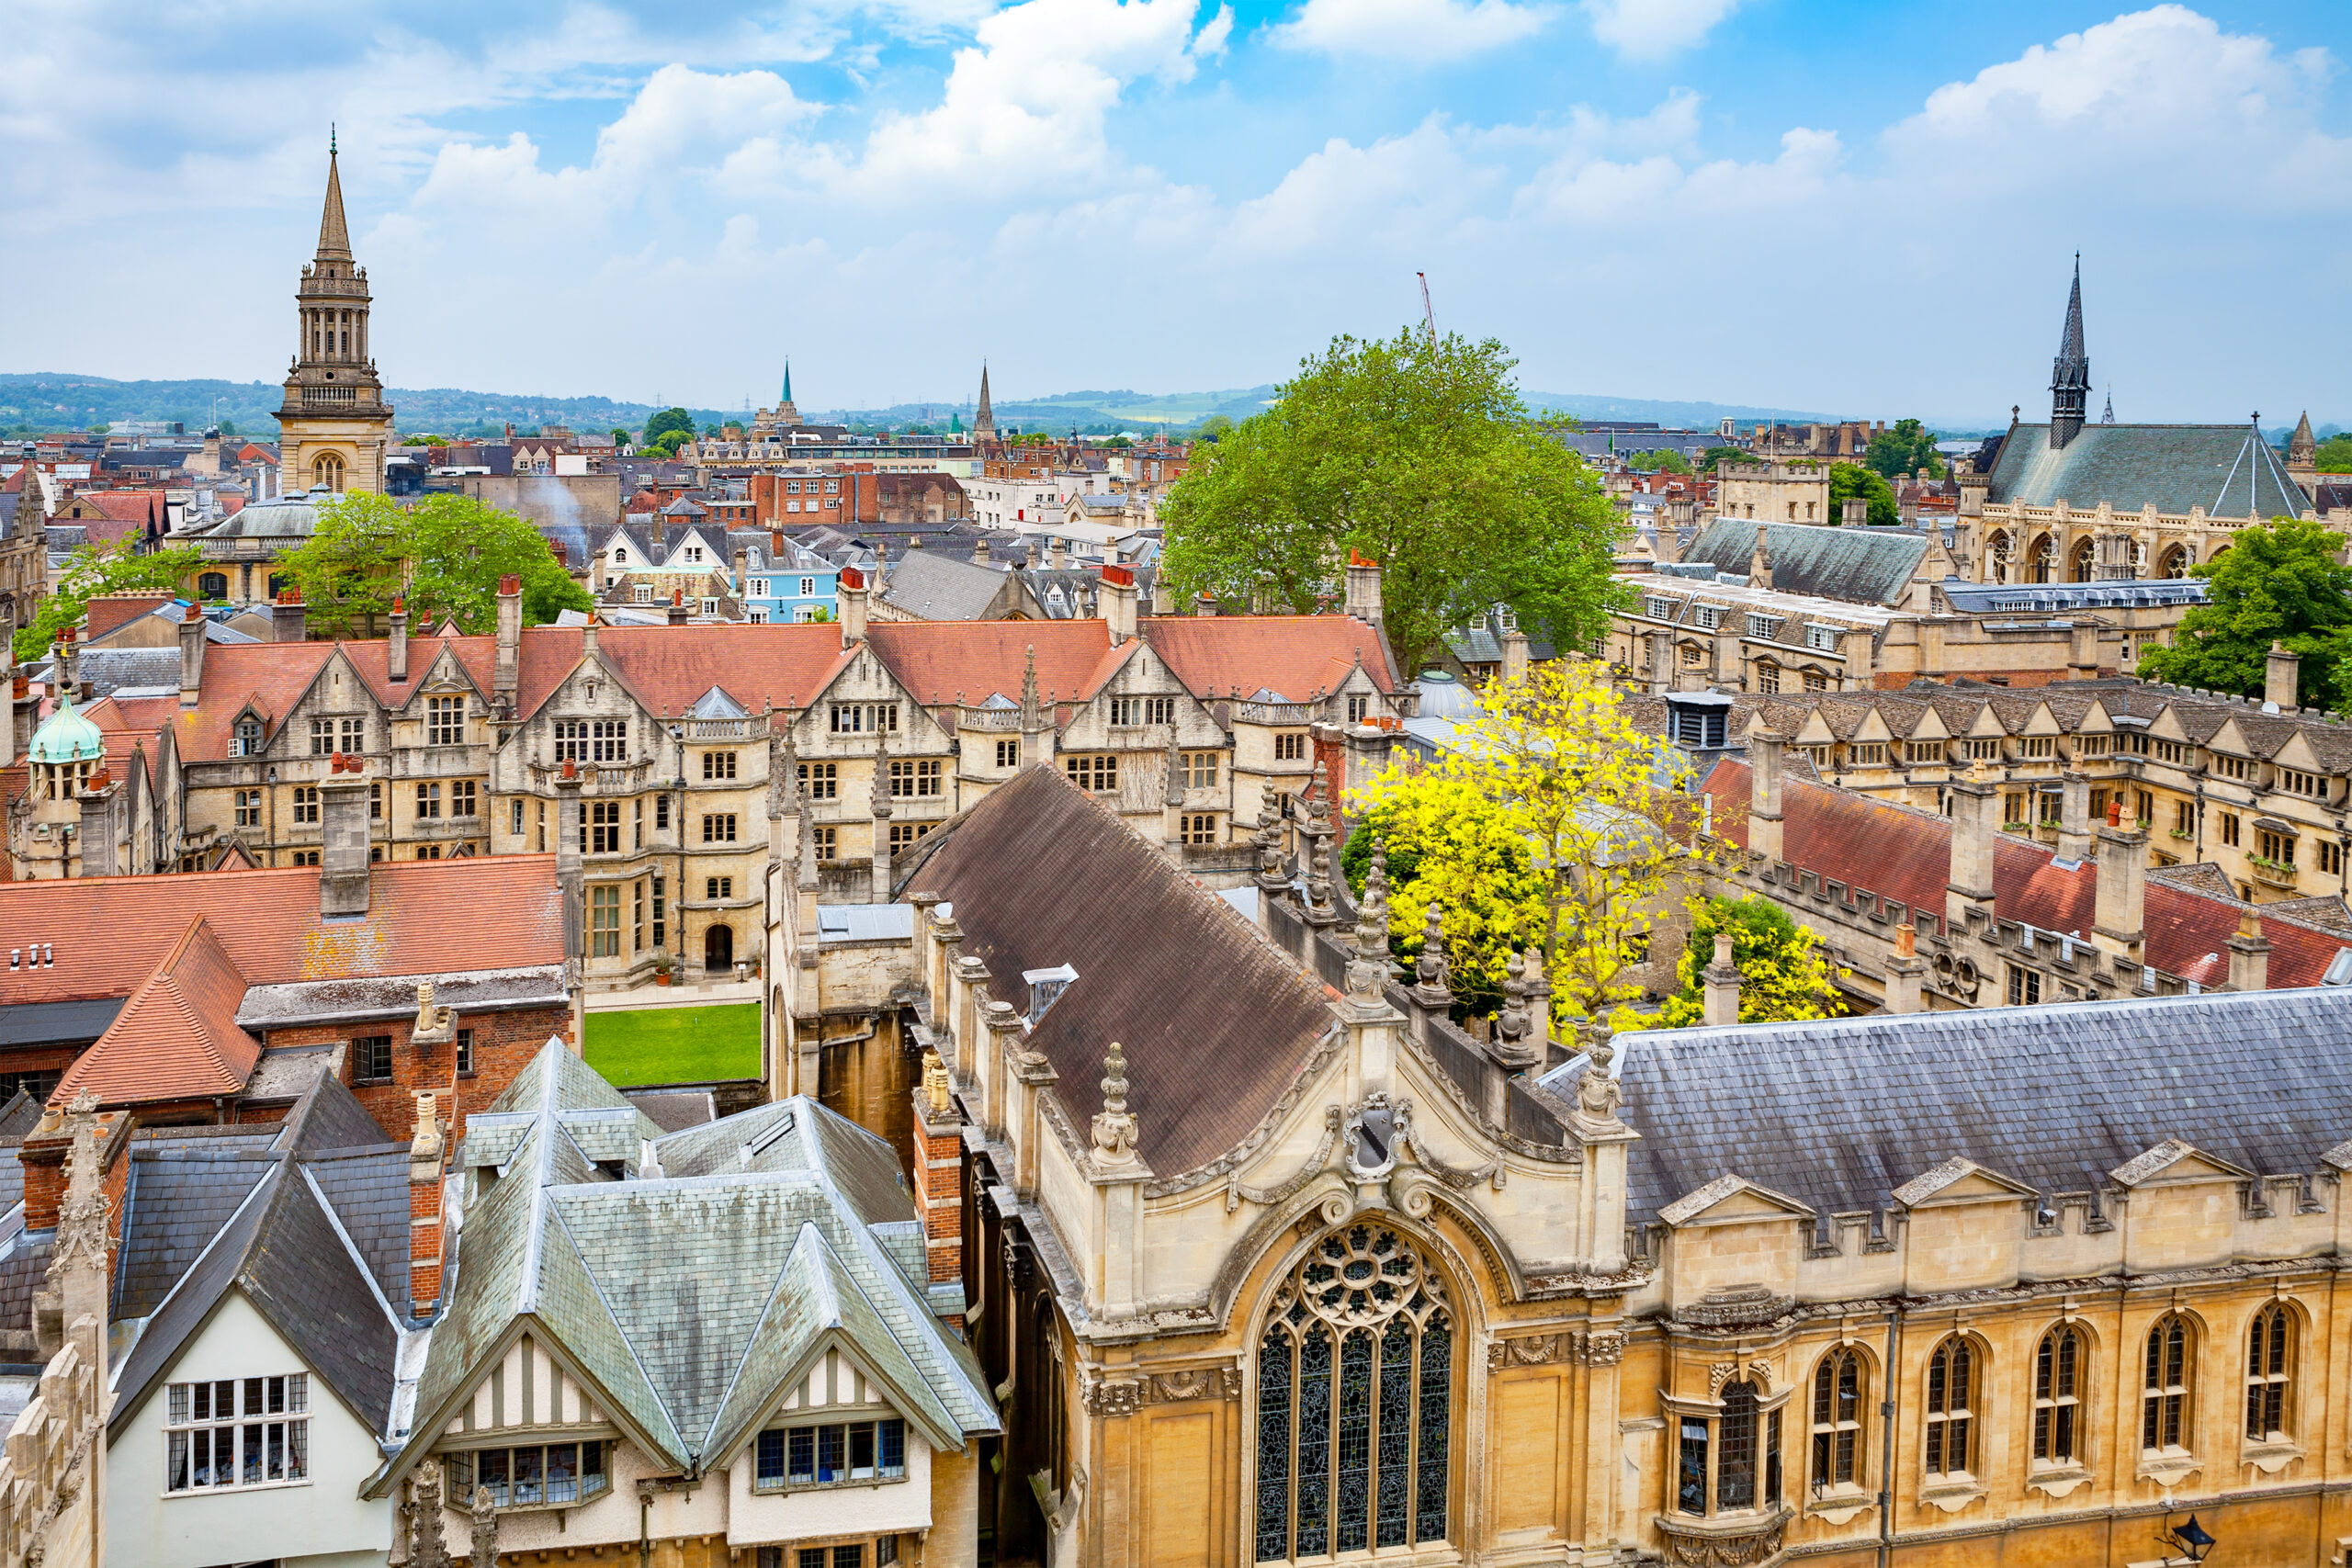 University of Oxford, St. Anne’s College Partnership